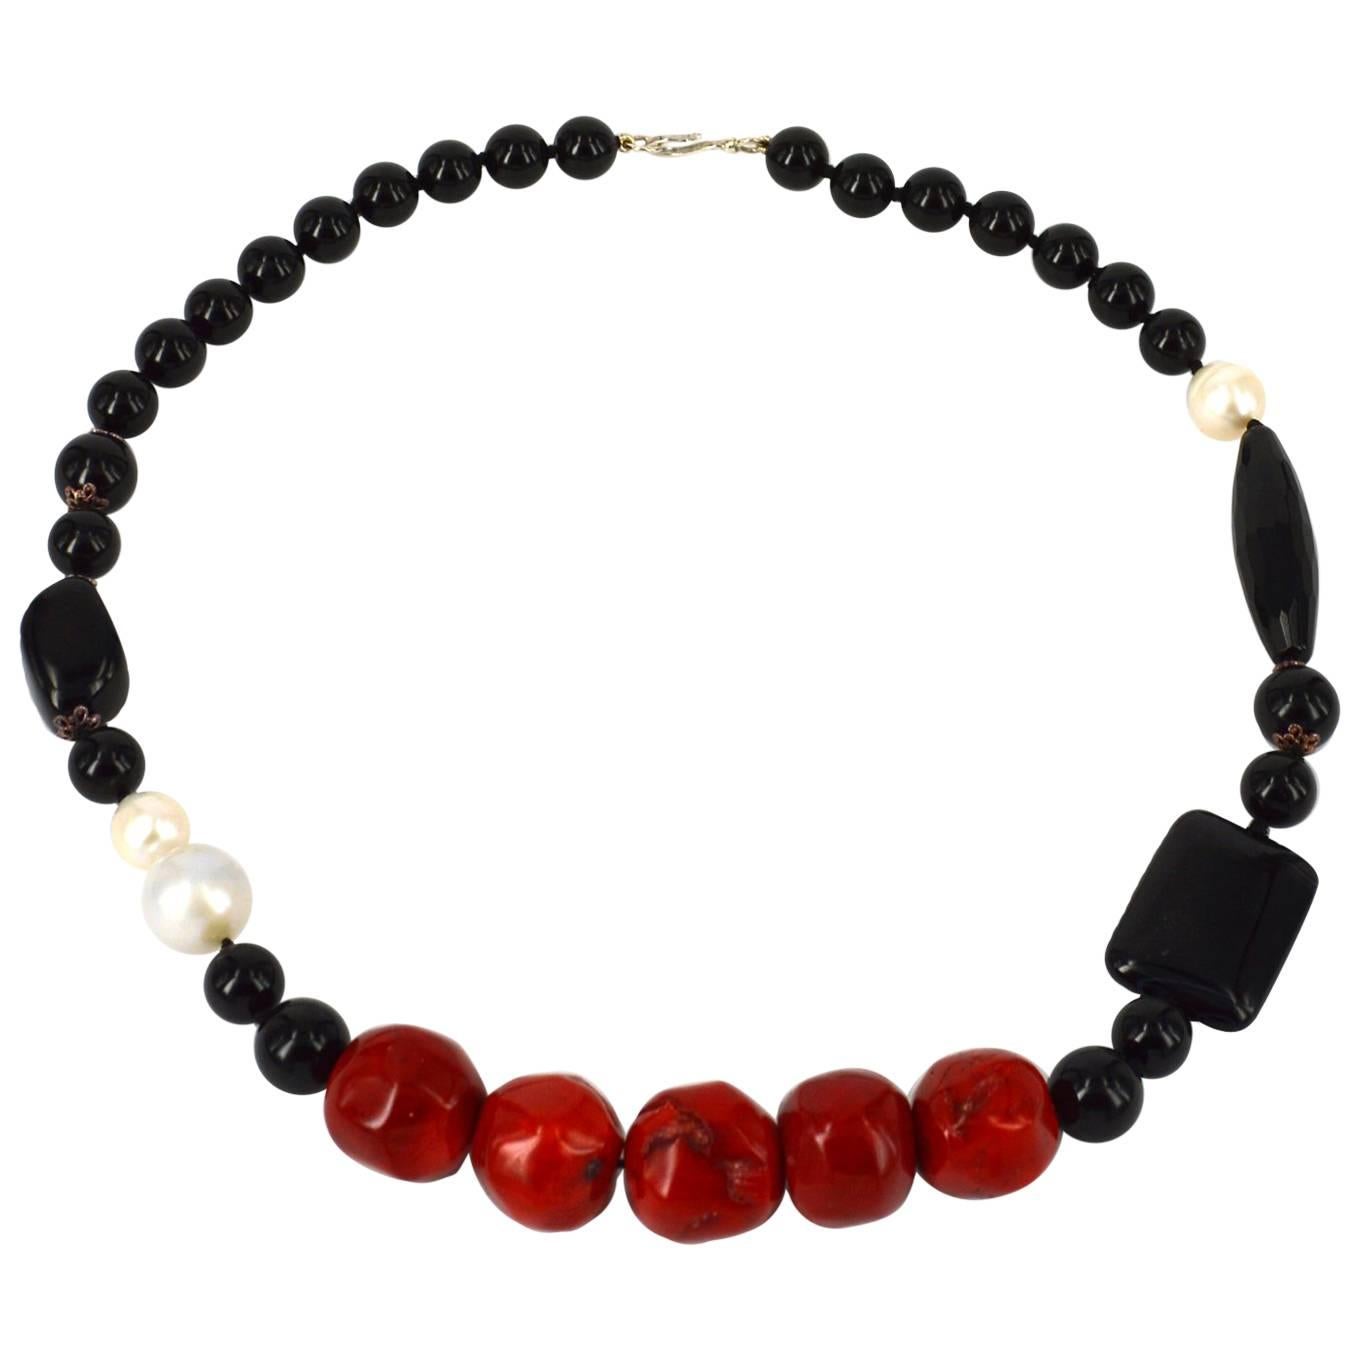 Black Onyx, Agate, Red Bamboo Coral and Freshwater Pearl Necklace